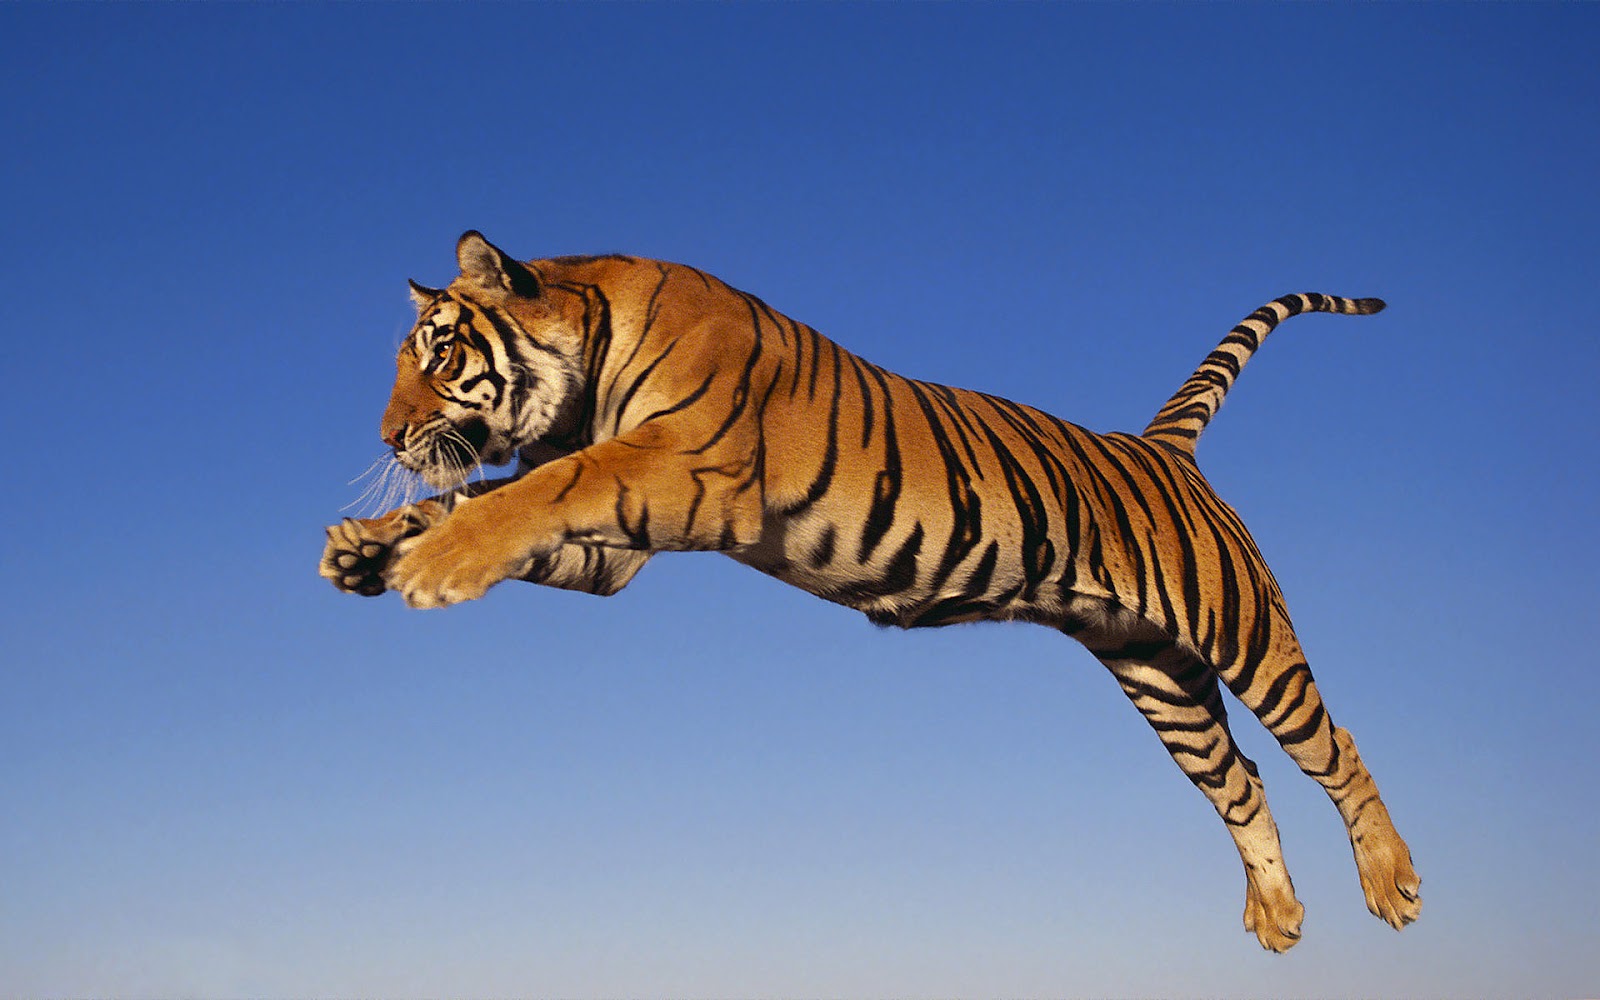 hd tiger wallpaper with a jumping and attacking tiger wallpapers